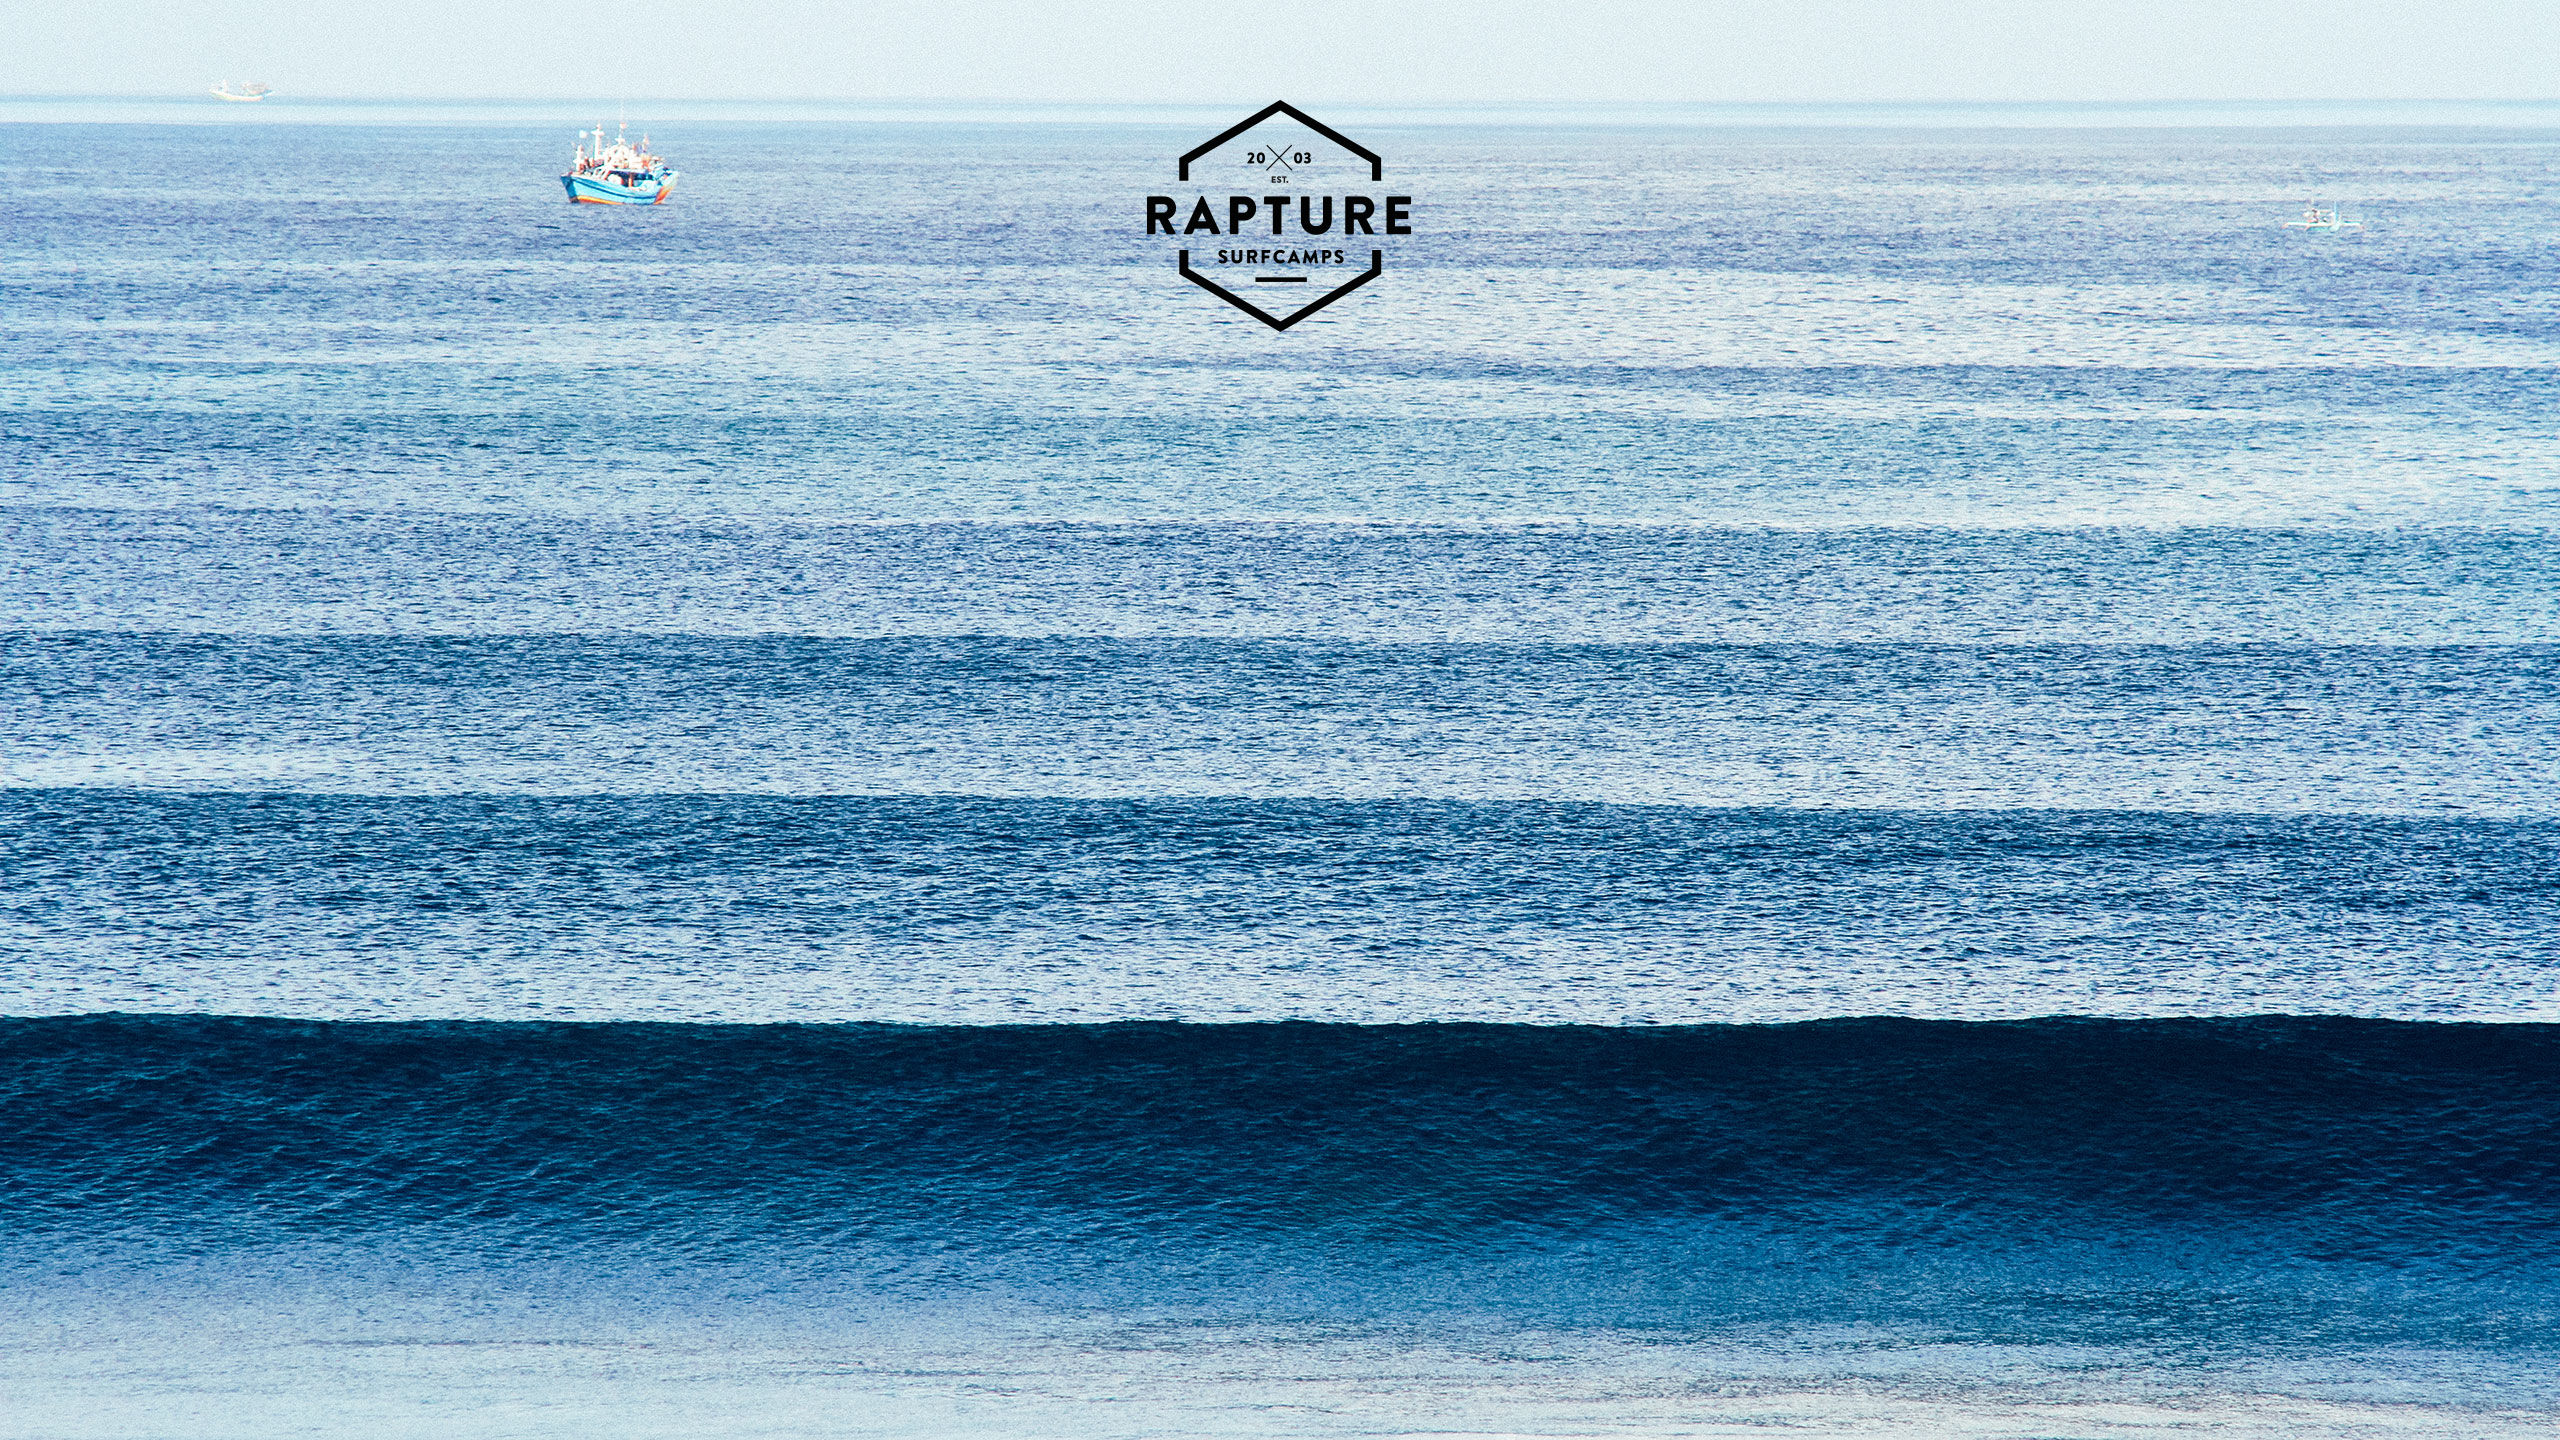 Surf Wallpaper From Our Surfcamps Rapture